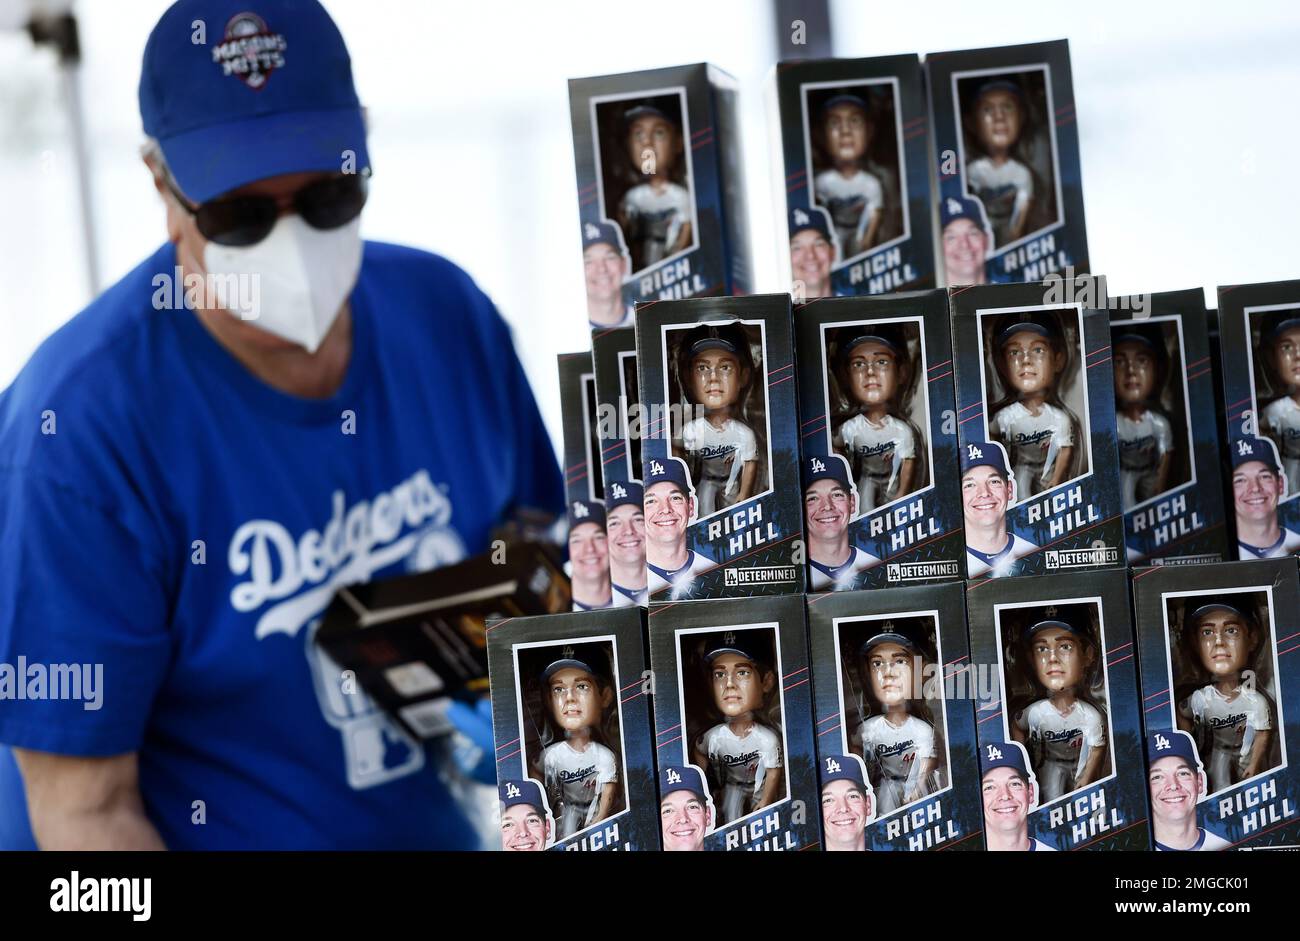 It's National Bobblehead Day! What's - Los Angeles Dodgers